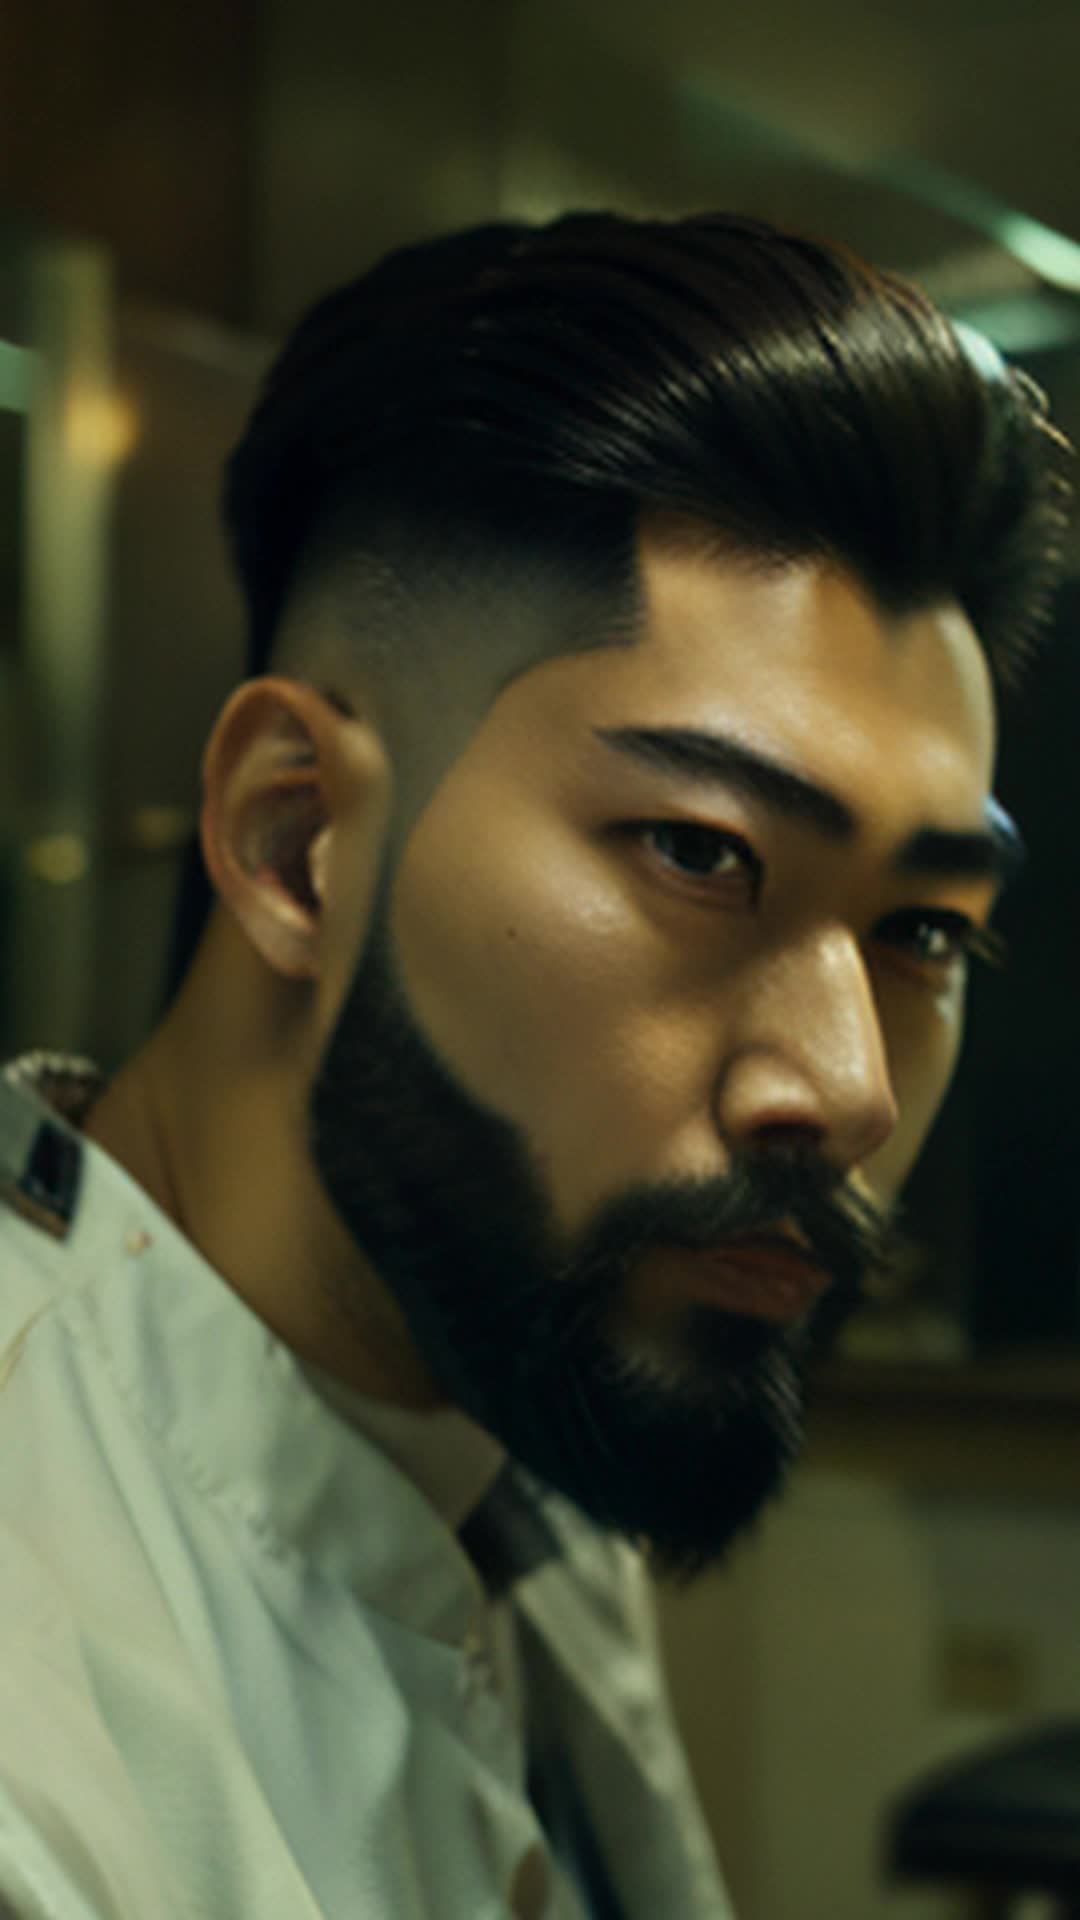 Young Asian man, barber shop chair, beard sculpting, focused barber, precise razor movements, reflective mirror, anticipation in eyes, bustling atmosphere